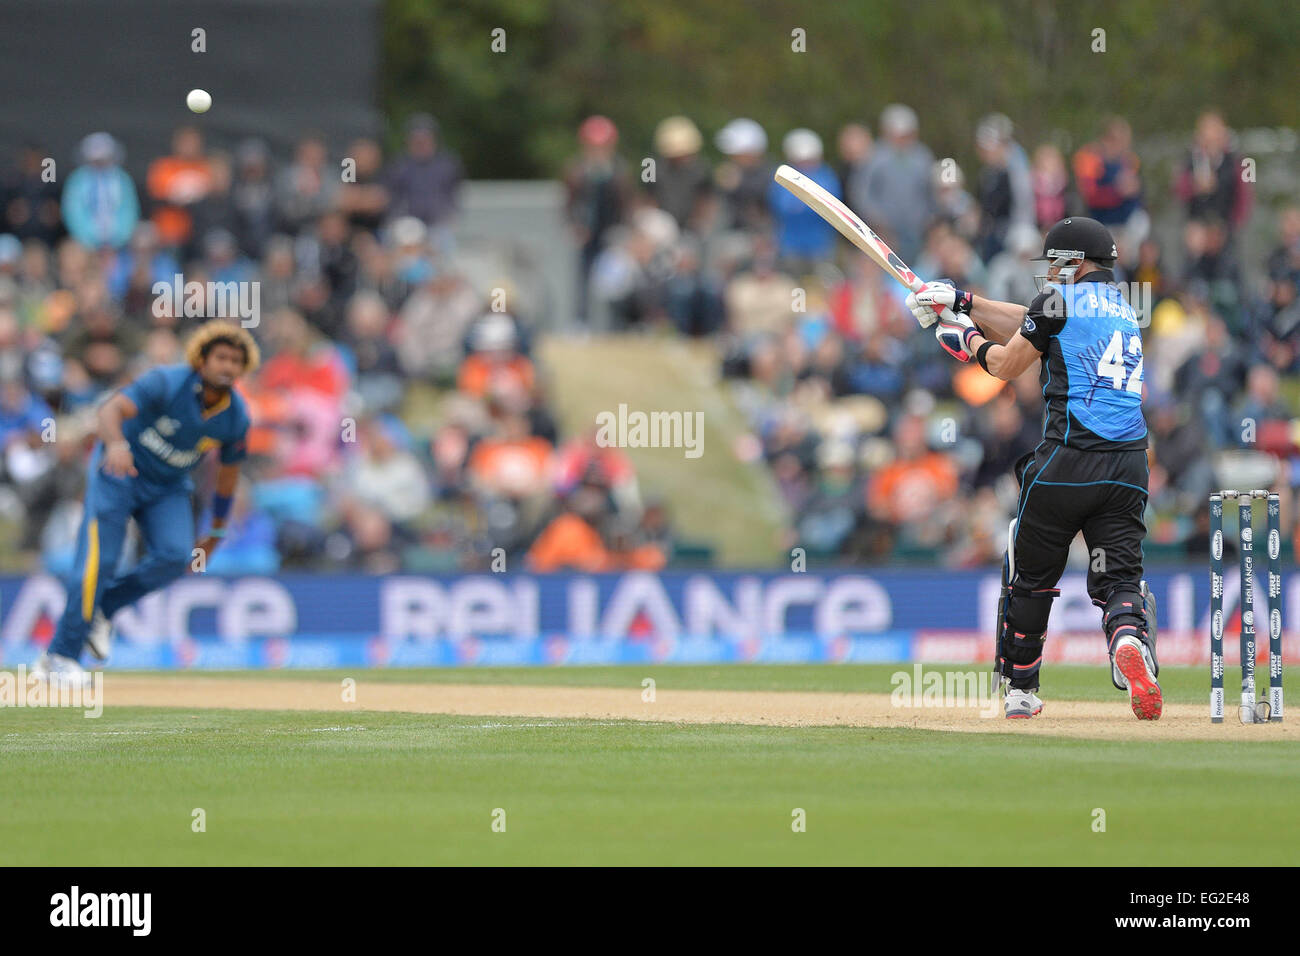 Christchurch, New Zealand. 14th Feb, 2015. Christchurch, New Zealand - February 14, 2015 - Brendon McCullum of New Zealand batting during the ICC Cricket World Cup Match between Sri Lanka and New Zealand at Hagley Oval on February 14, 2015 in Christchurch, New Zealand. © dpa/Alamy Live News Stock Photo